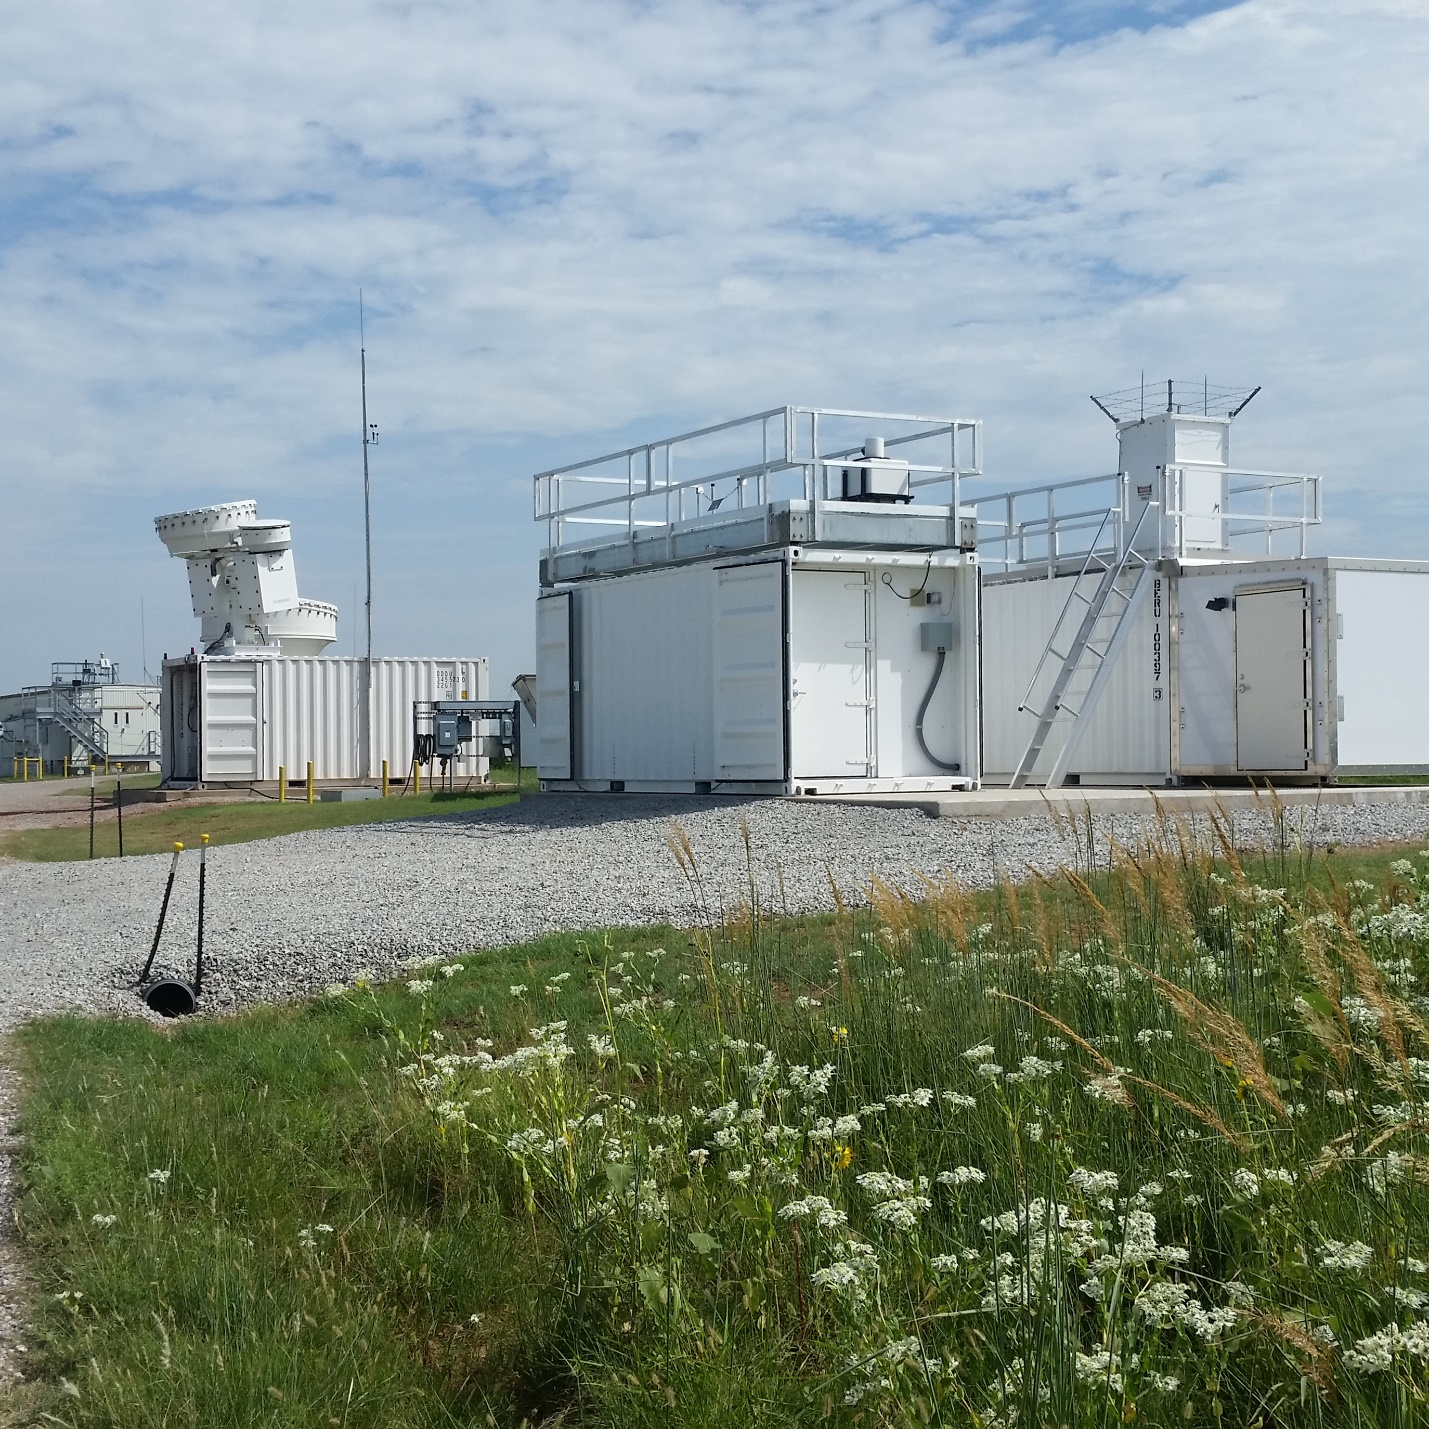 A Doppler radar at ARM’s Southern Great Plains atmospheric observatory is on top of the trailer to the left.